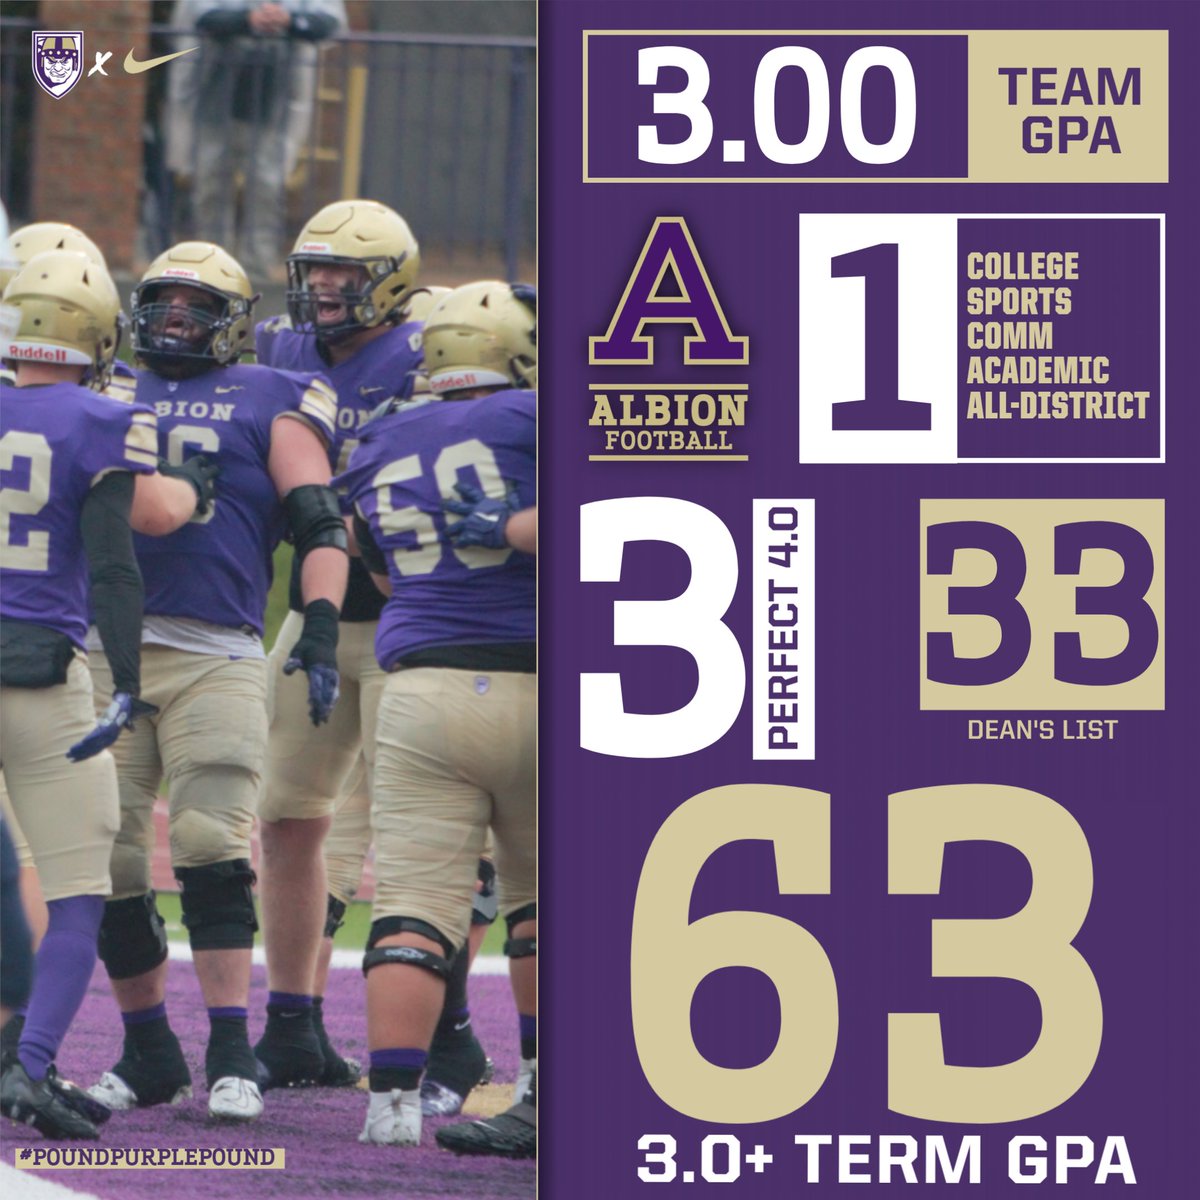 Incredible work in the classroom this semester! Compete in everything you do! #PPP